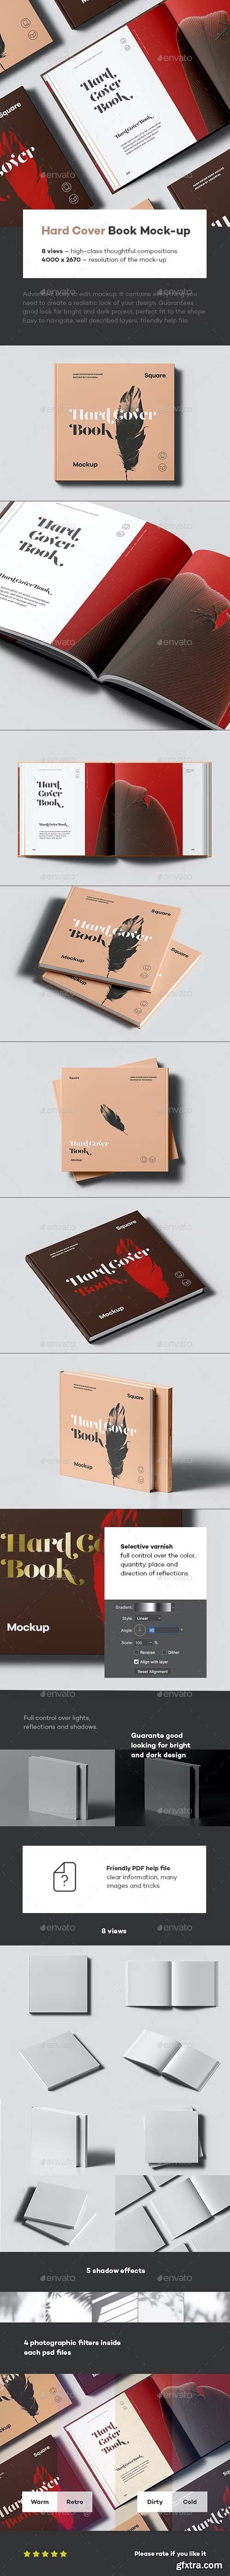 Graphicriver - Hard Cover Square Book Mock-up 41694675